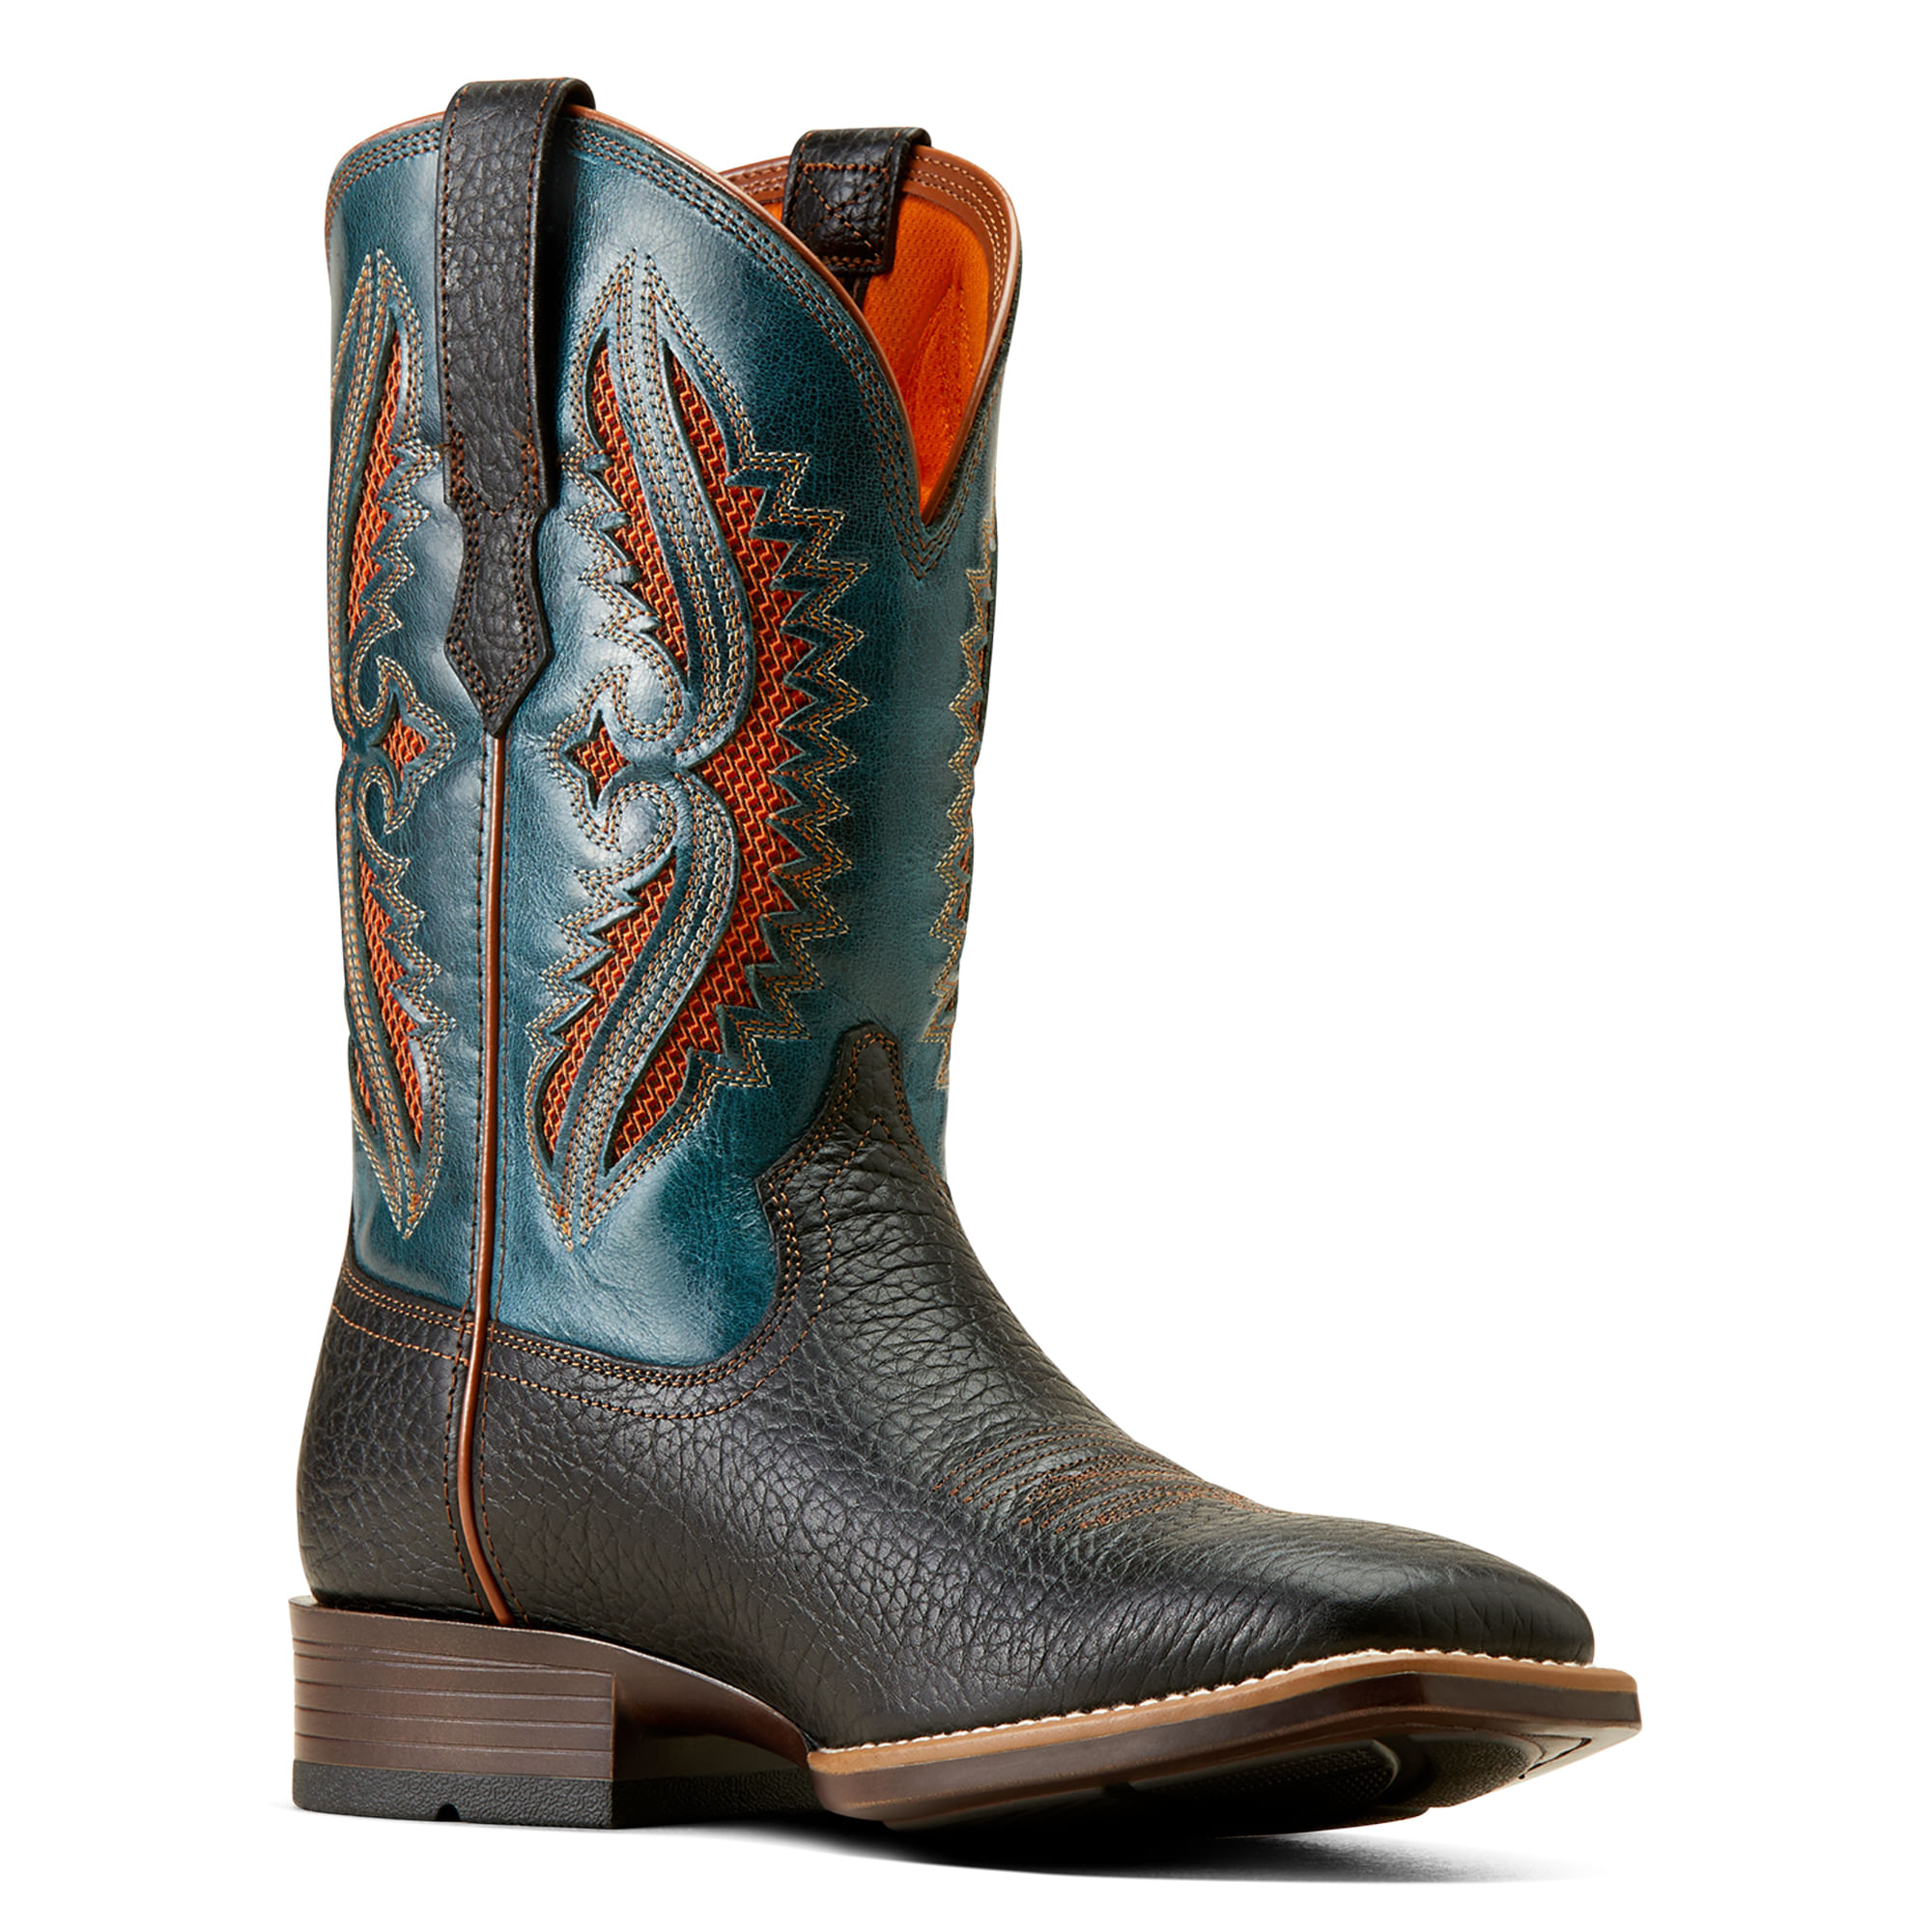 The Texas Boot Company - The Ariat Arena Rebound. $189.99 - Sign up for our  email list and Save 20% on your 1st online order.